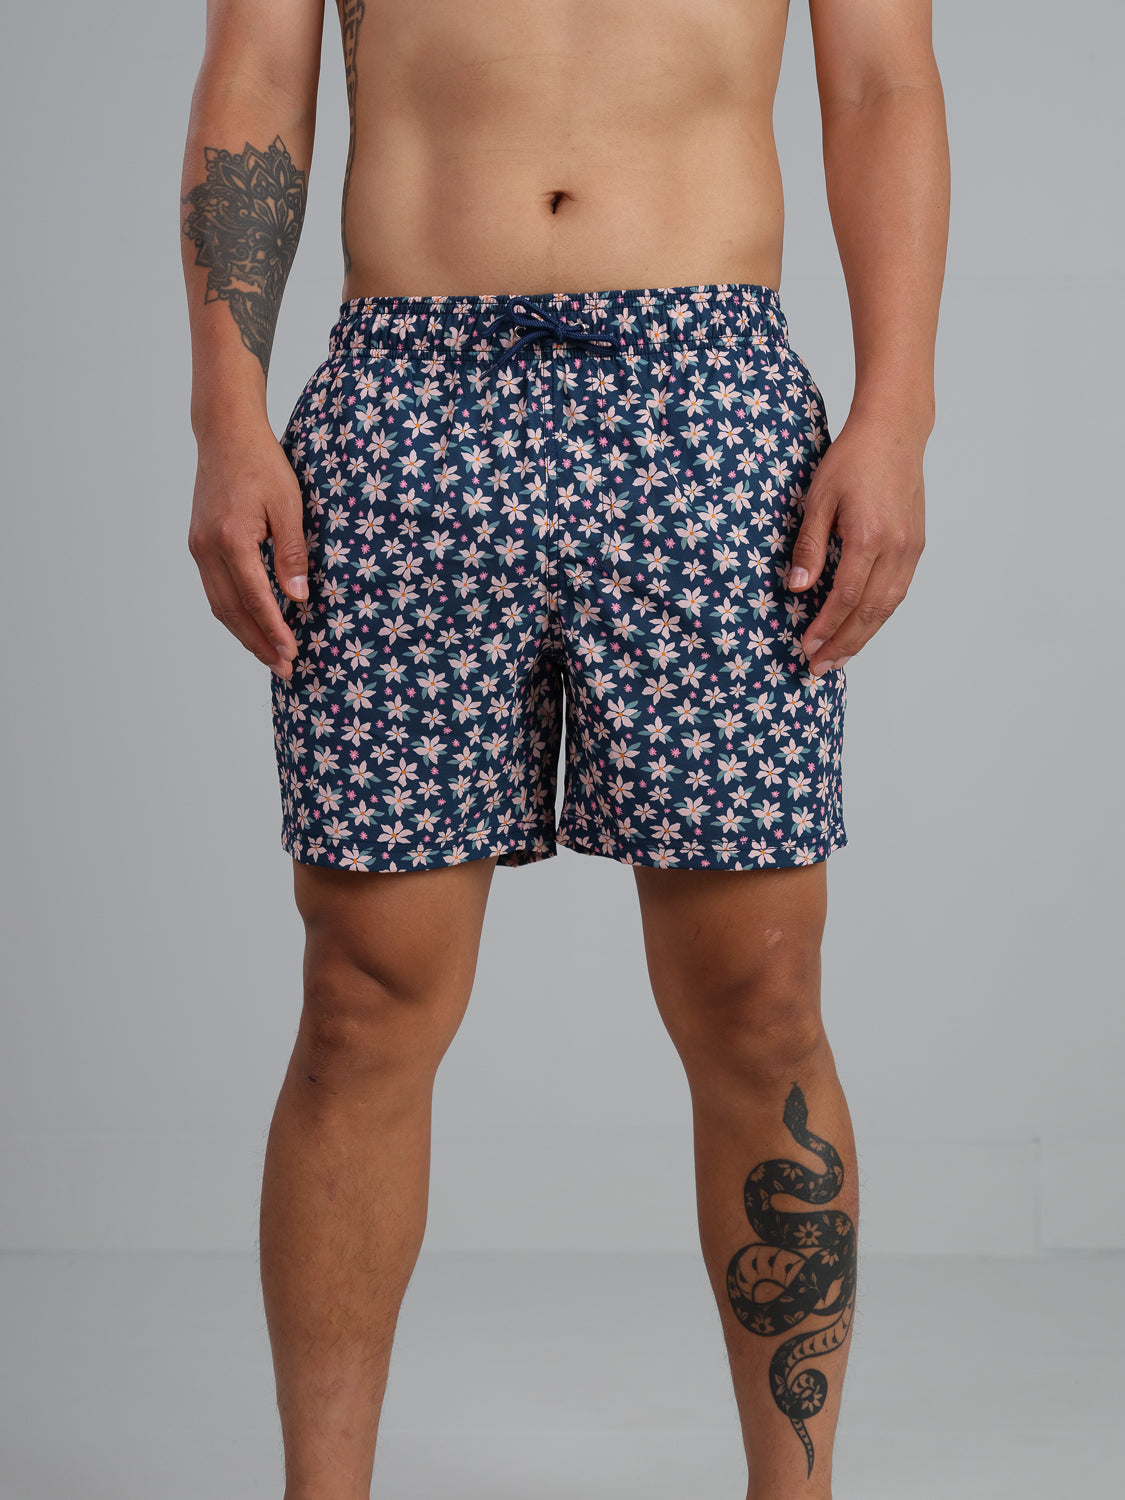 Yamato - Floral printed swim trunk with fast dry and stretch